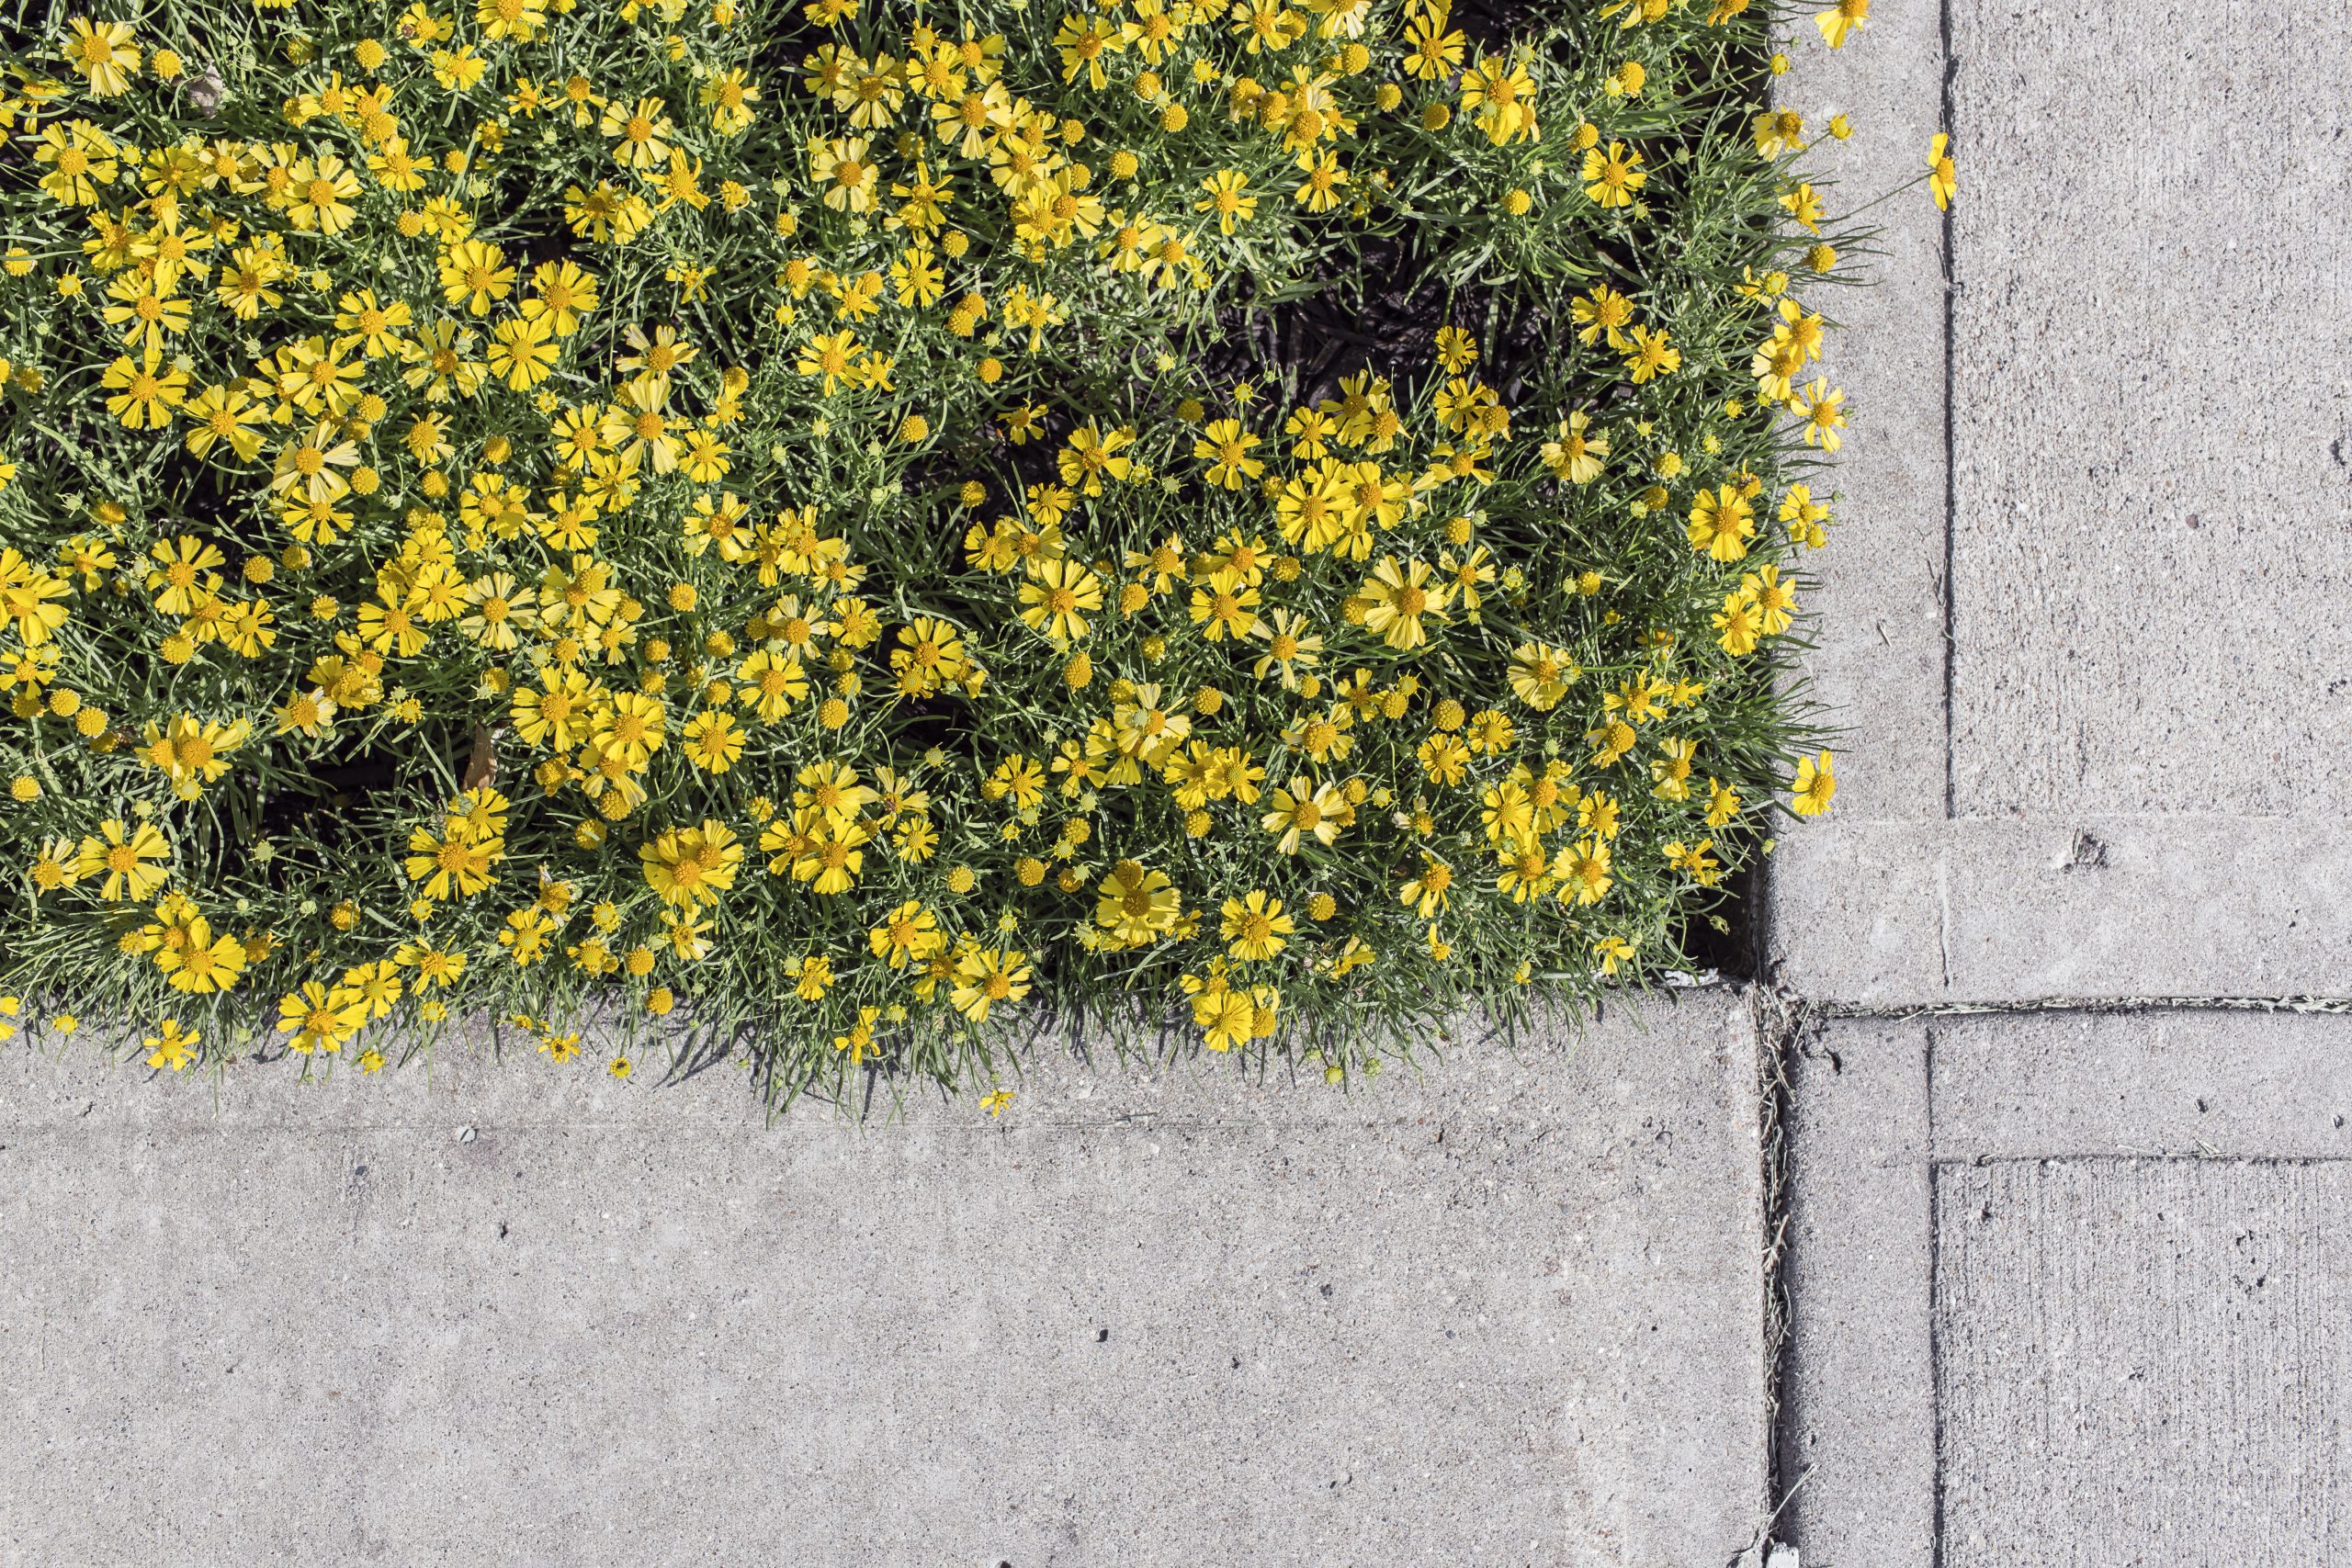 Flowers in pavement